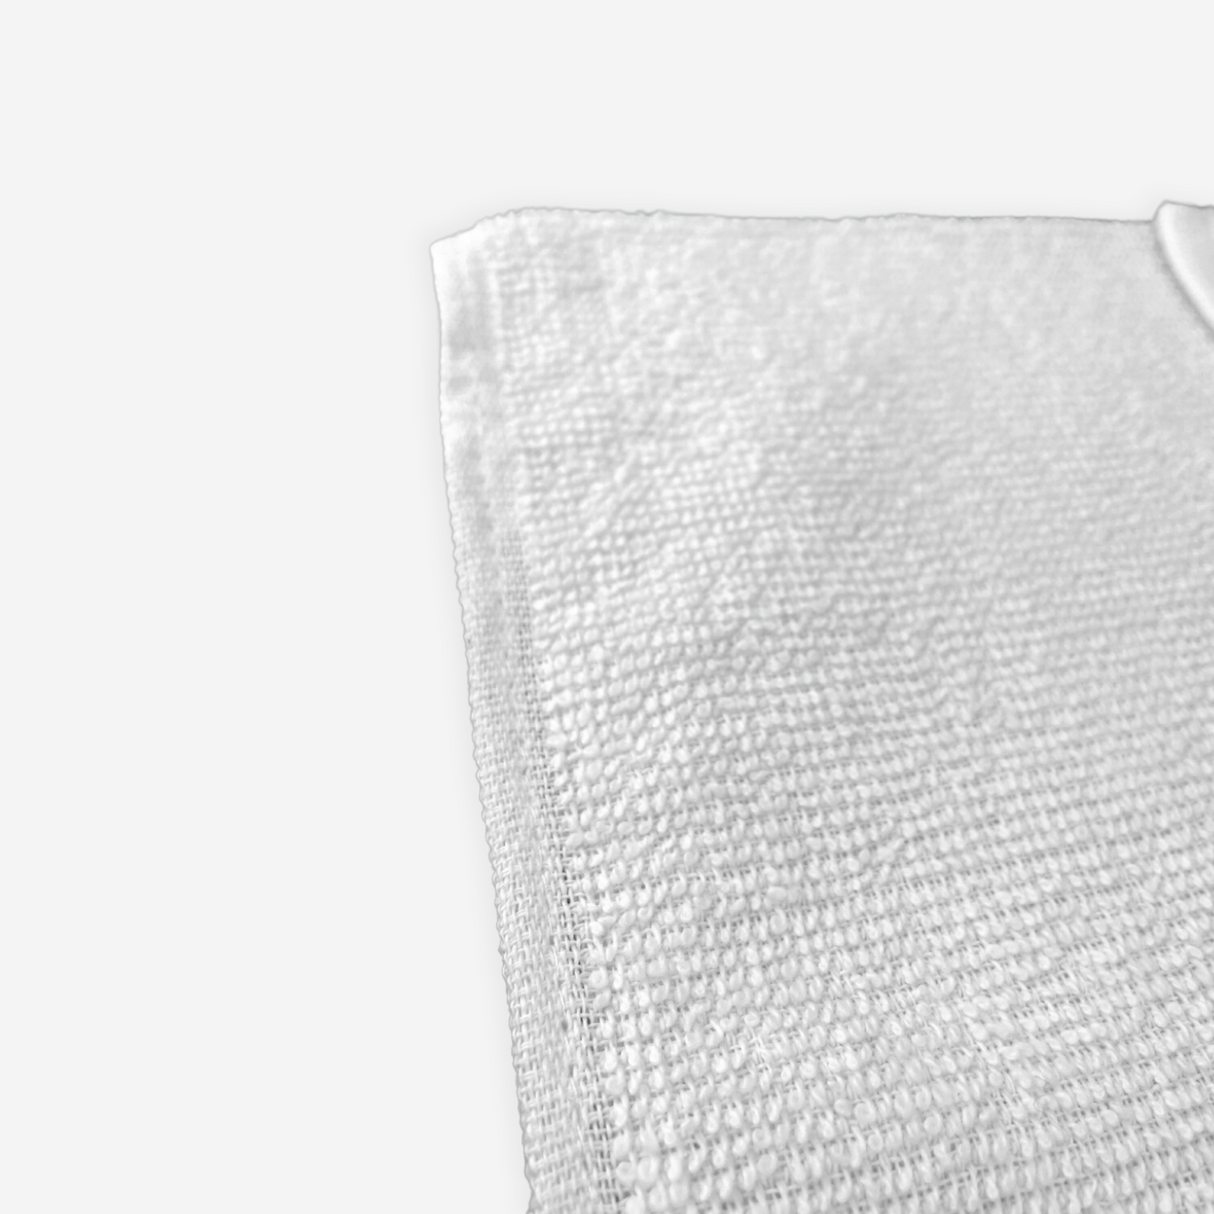 Close up view on the corner of a white cleaning towel.